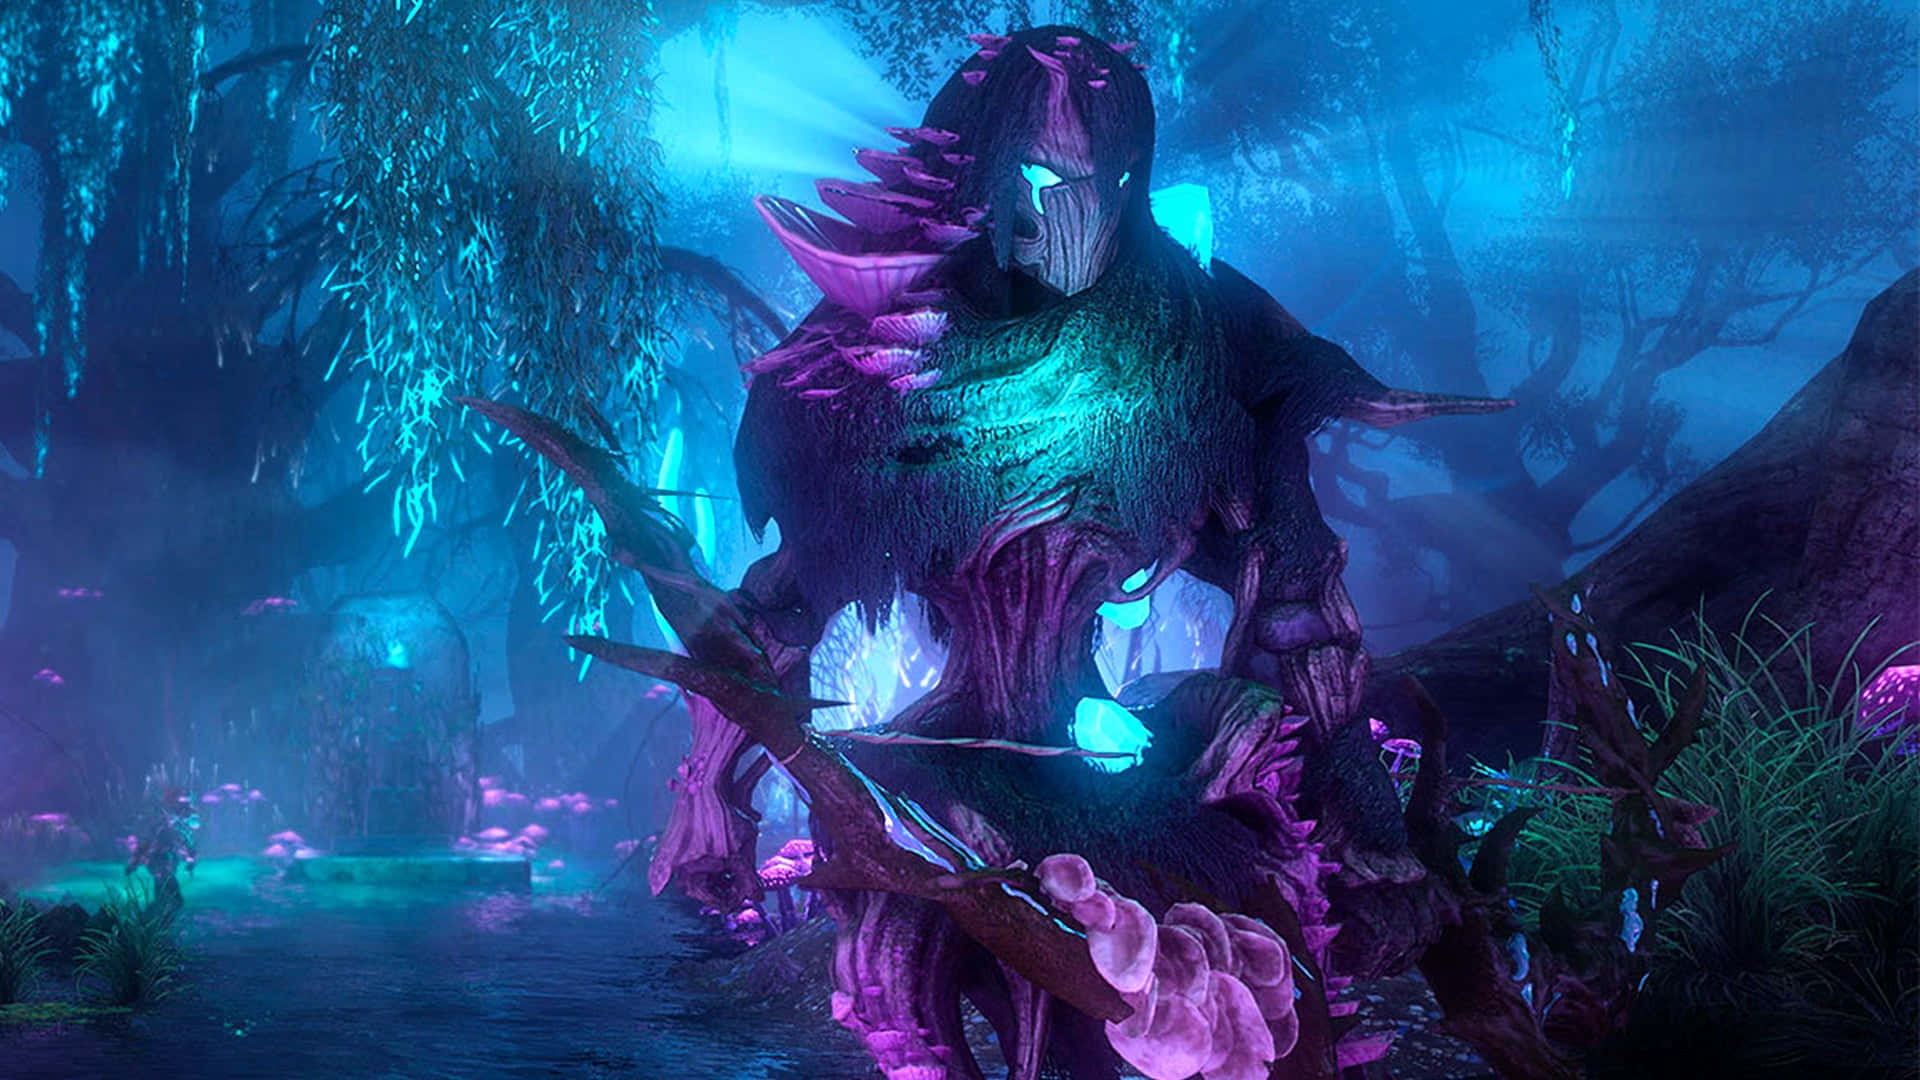 A Purple And Blue Creature In The Forest